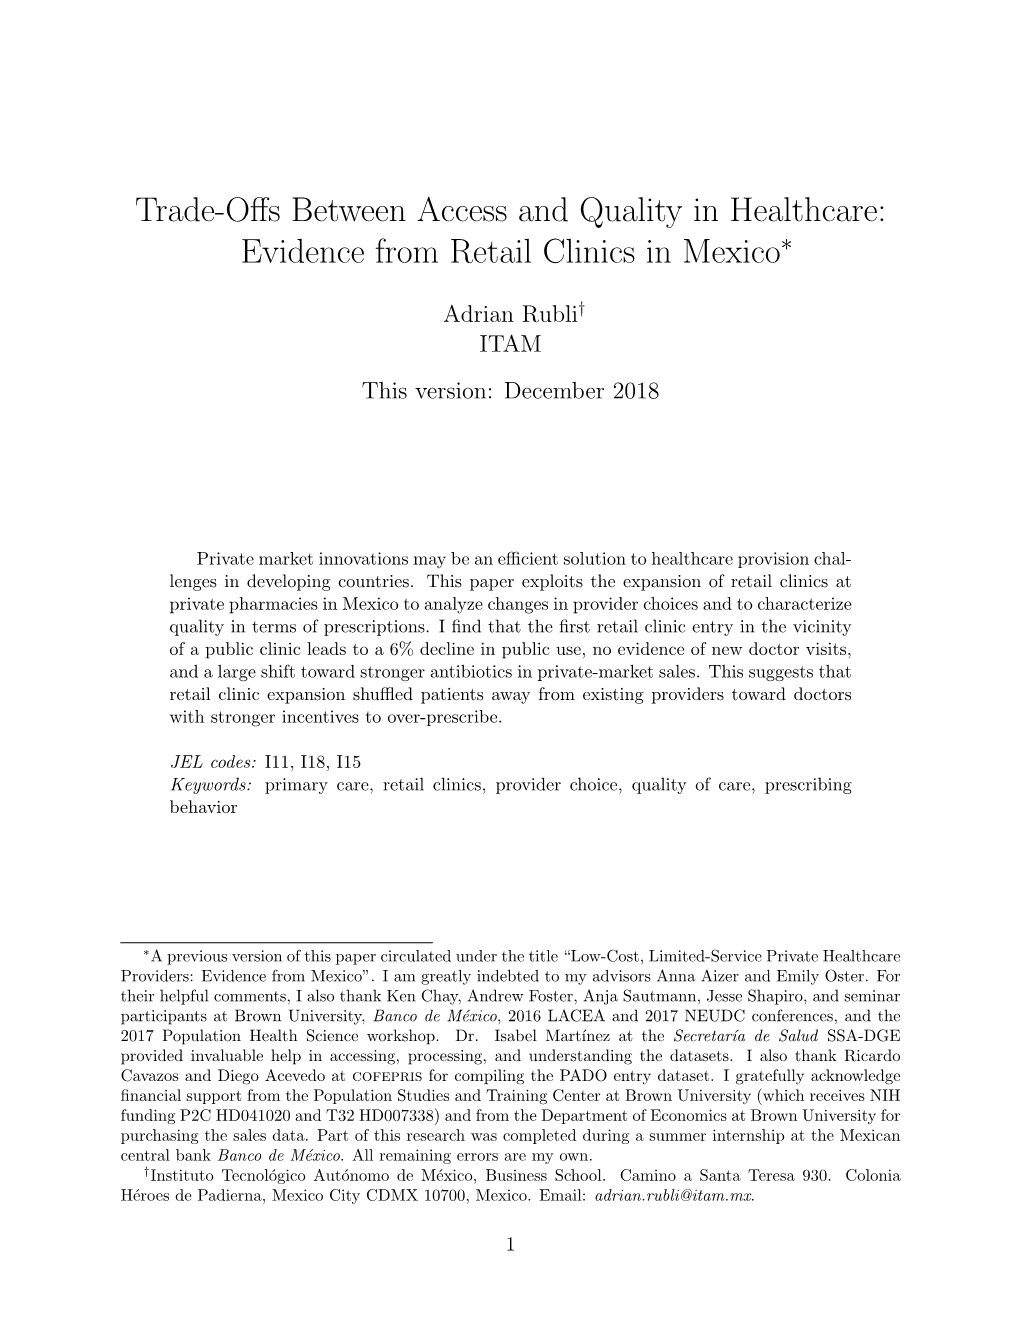 Trade-Offs Between Access and Quality in Healthcare